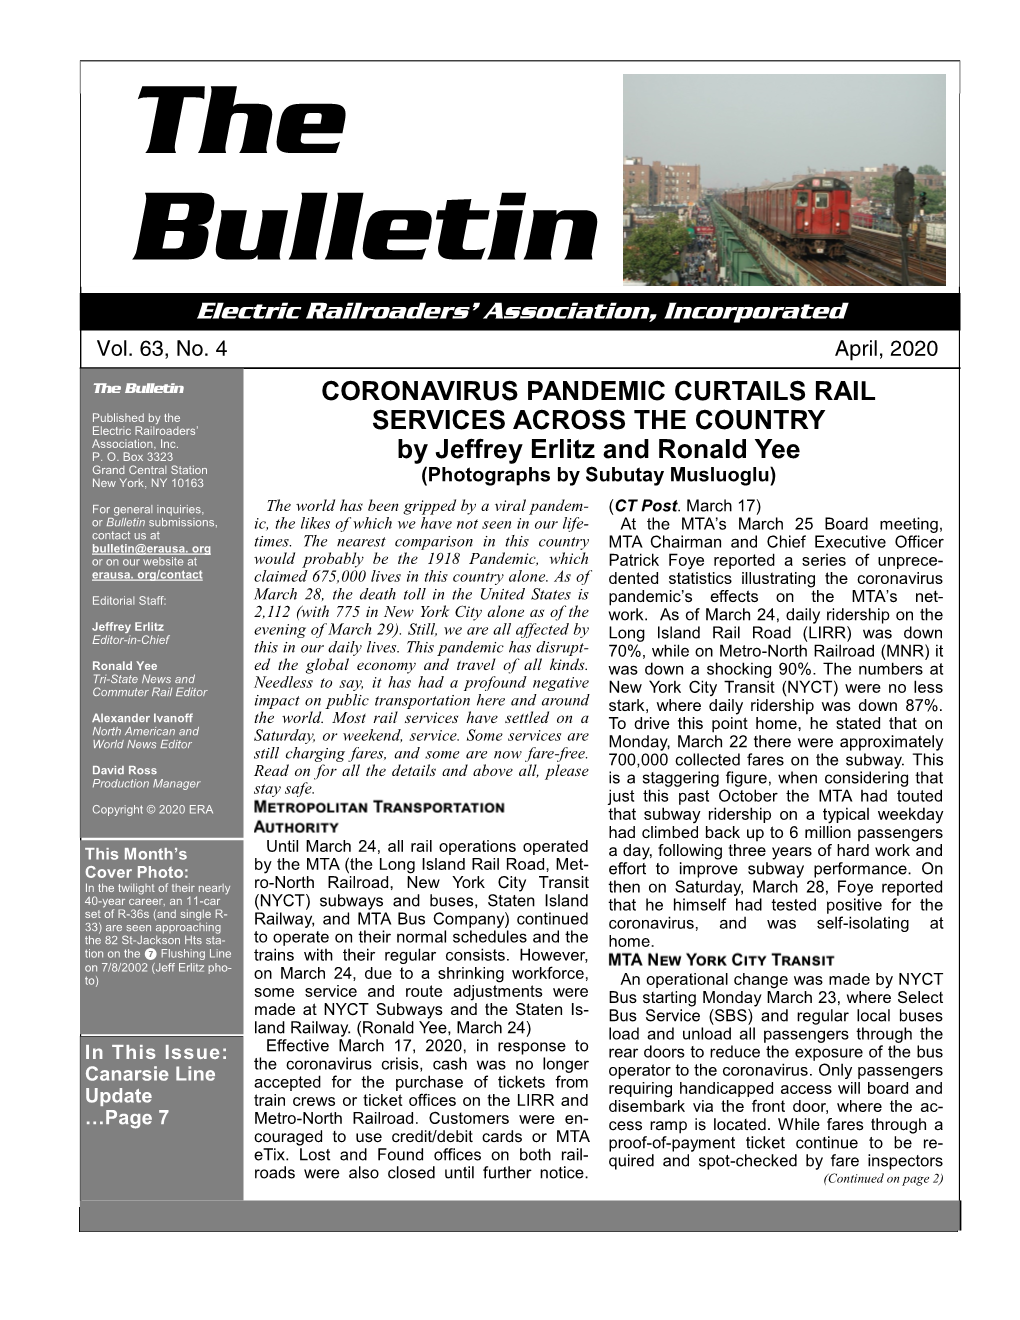 The Bulletin CORONAVIRUS PANDEMIC CURTAILS RAIL Published by the Electric Railroaders’ SERVICES ACROSS the COUNTRY Association, Inc